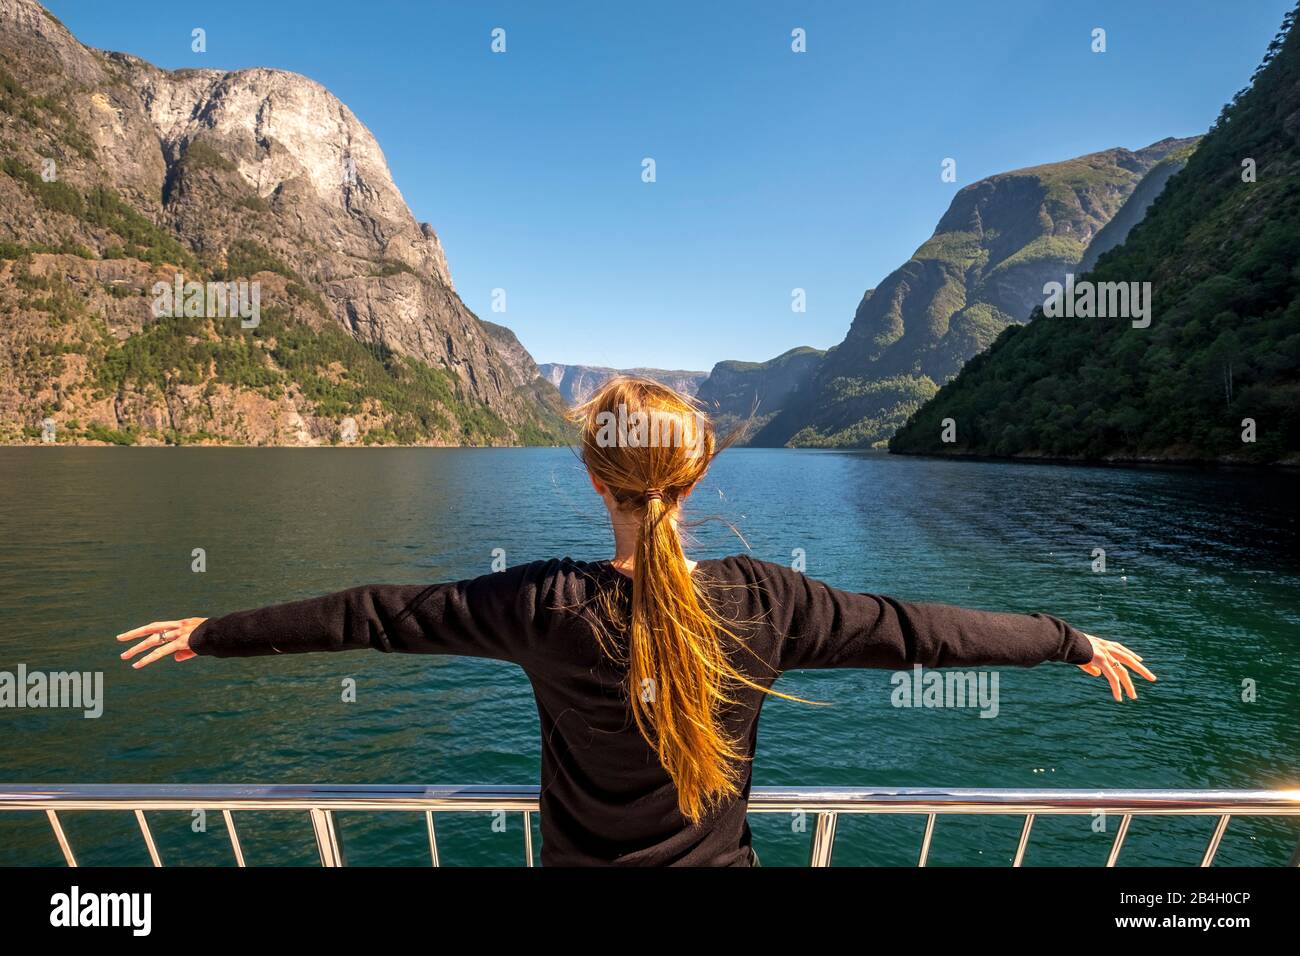 Woman with outstretched arms on excursion ship, fjord, Nærøyfjorden, blue sky, mountains, rock walls, trees, Styvi, Sogn og Fjordane, Norway, Scandinavia, Europe Stock Photo